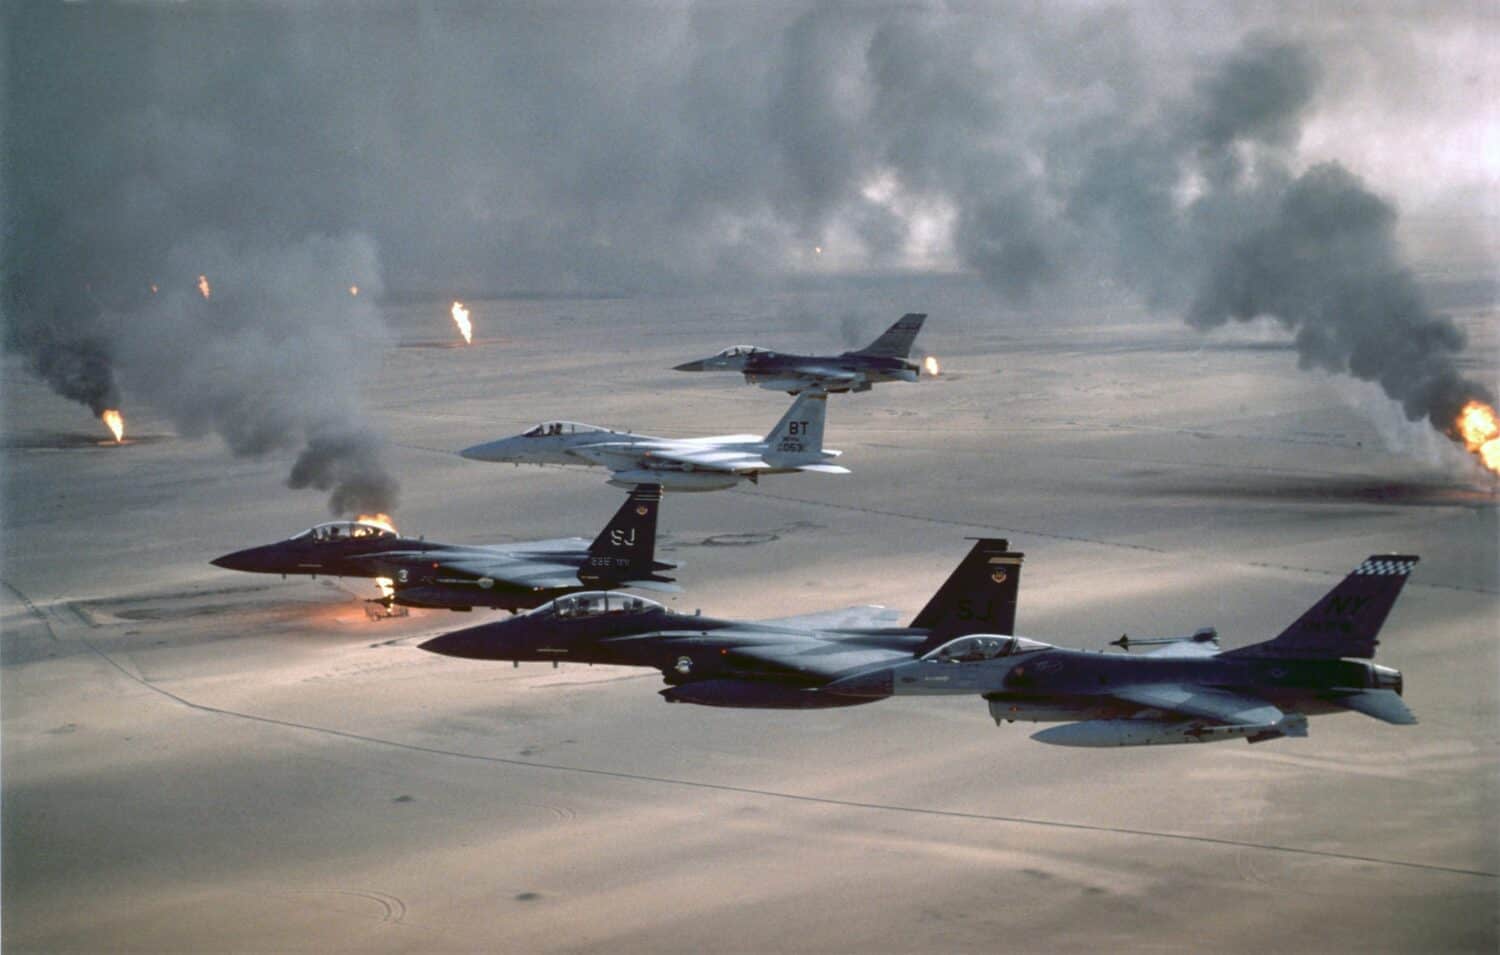 U.S. Air Force fighters patrol no-fly zone over Iraq. After First Gulf War in 1991 U.S. and Allied forces began Operation Southern Watch on Aug. 26 1992 to ensure Iraq's compliance with cease fire.